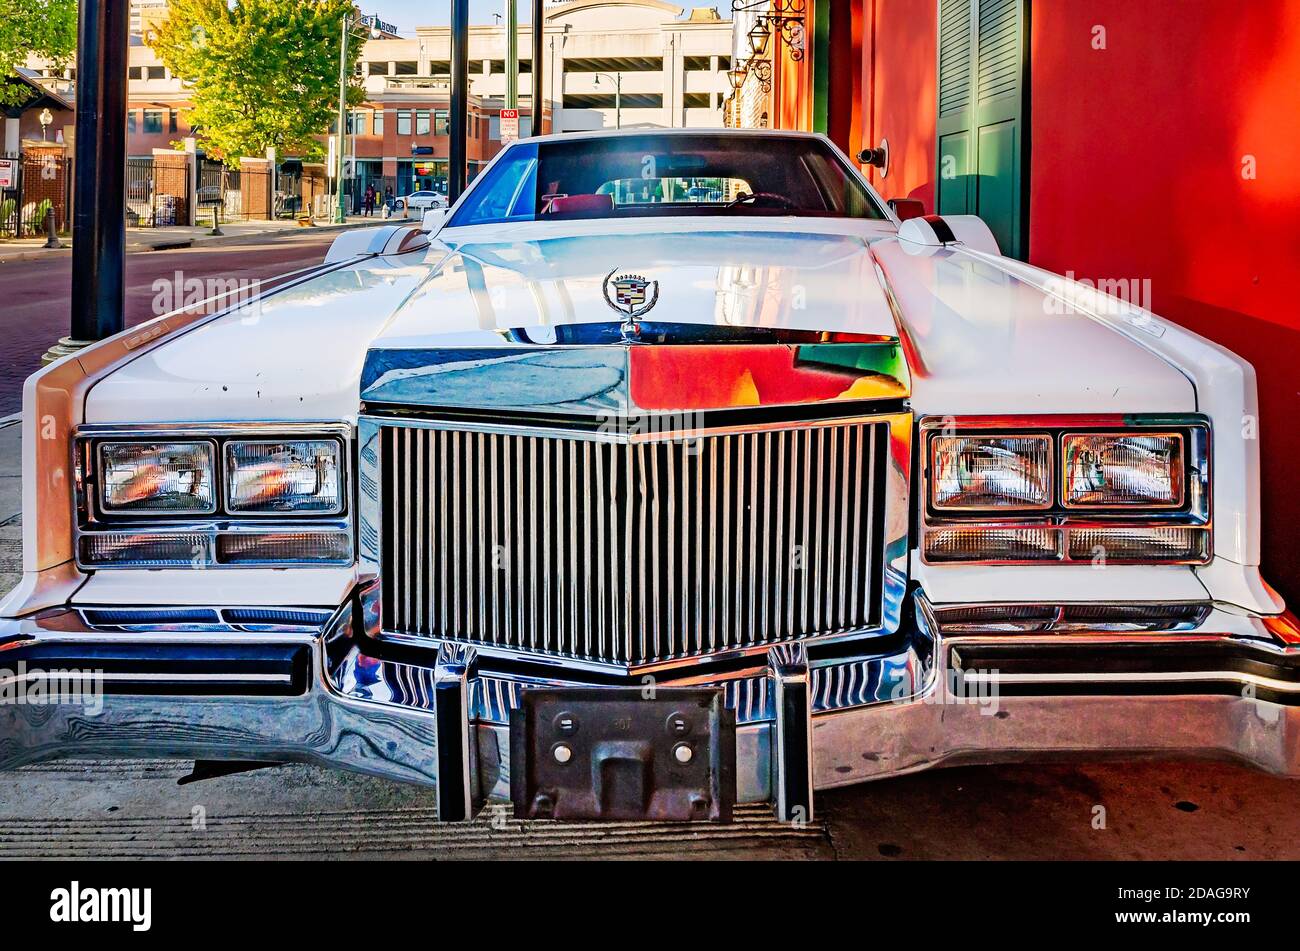 A Cadillac Eldorado Paris Opera Coupe is displayed outside Jerry Lee Lewis’ Cafe & Honky Tonk on Beale Street, Sept. 12, 2015, in Memphis, Tennessee. Stock Photo